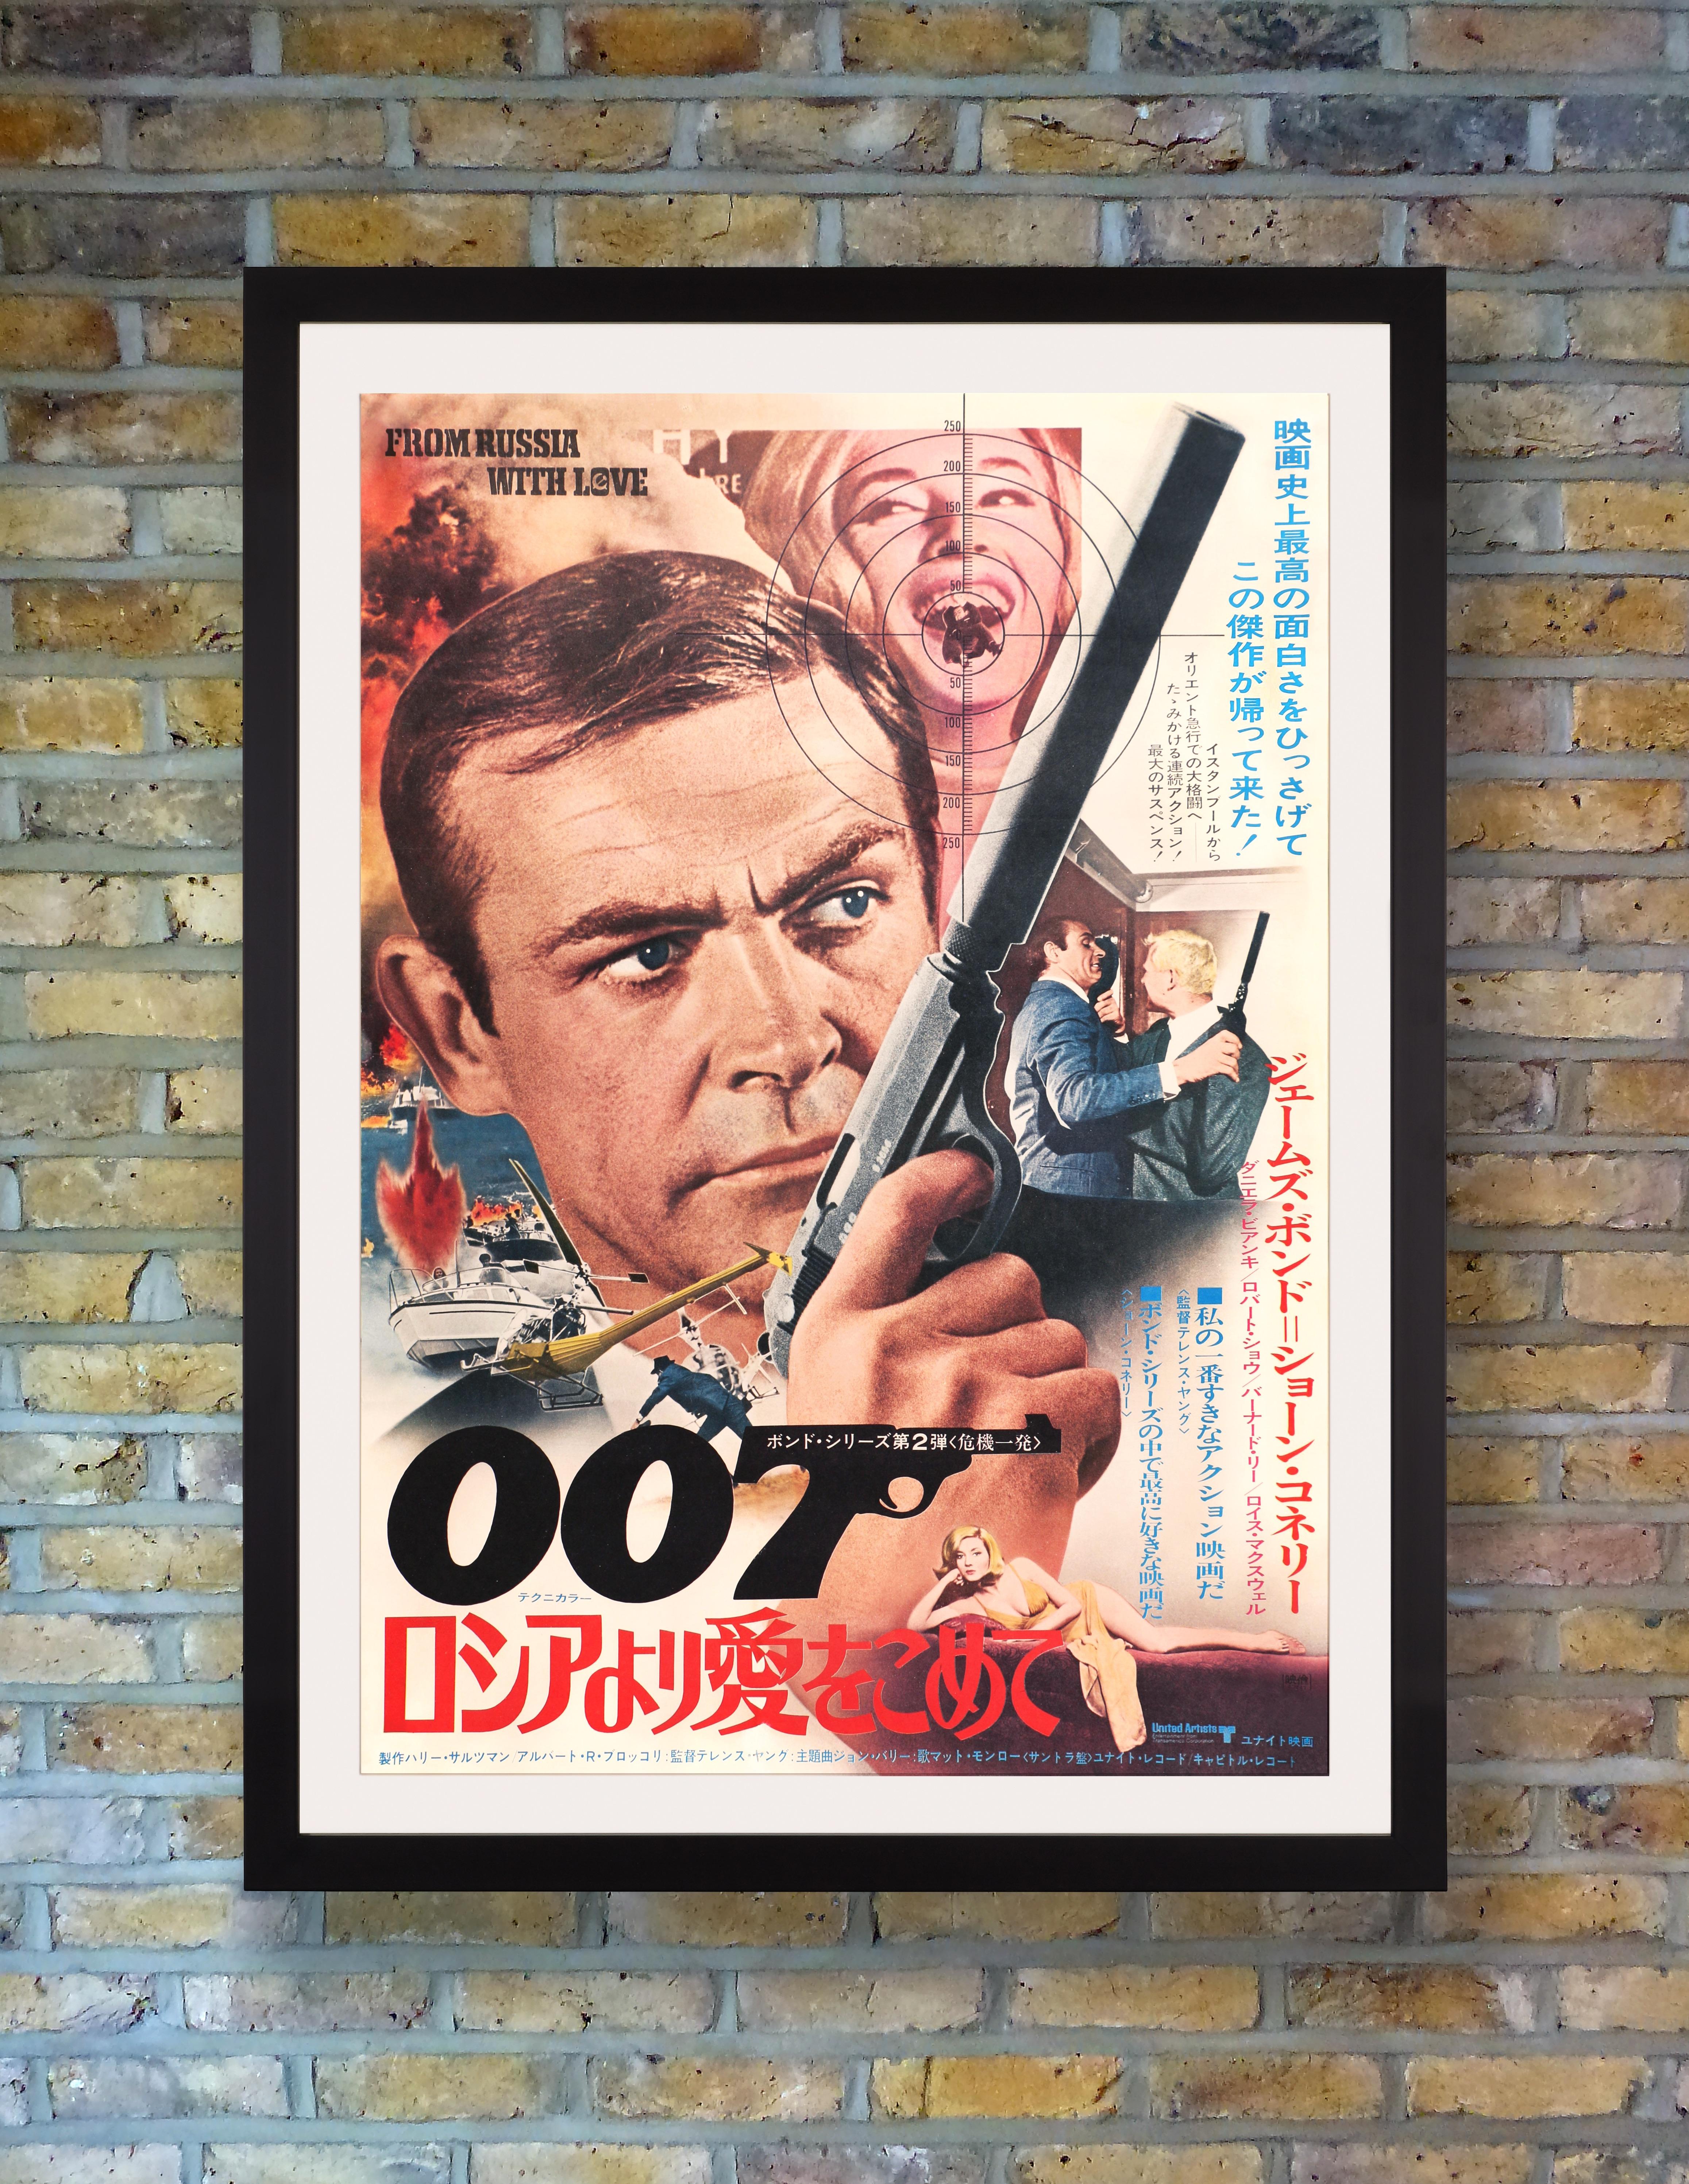 In Sean Connery's second outing as James Bond, 'From Russia With Love' saw the British spy battling a secret crime organisation known as Spectre. The follow-up to 007's 1962 debut in 'Dr. No,' Terence Young's 'From Russia With Love' further